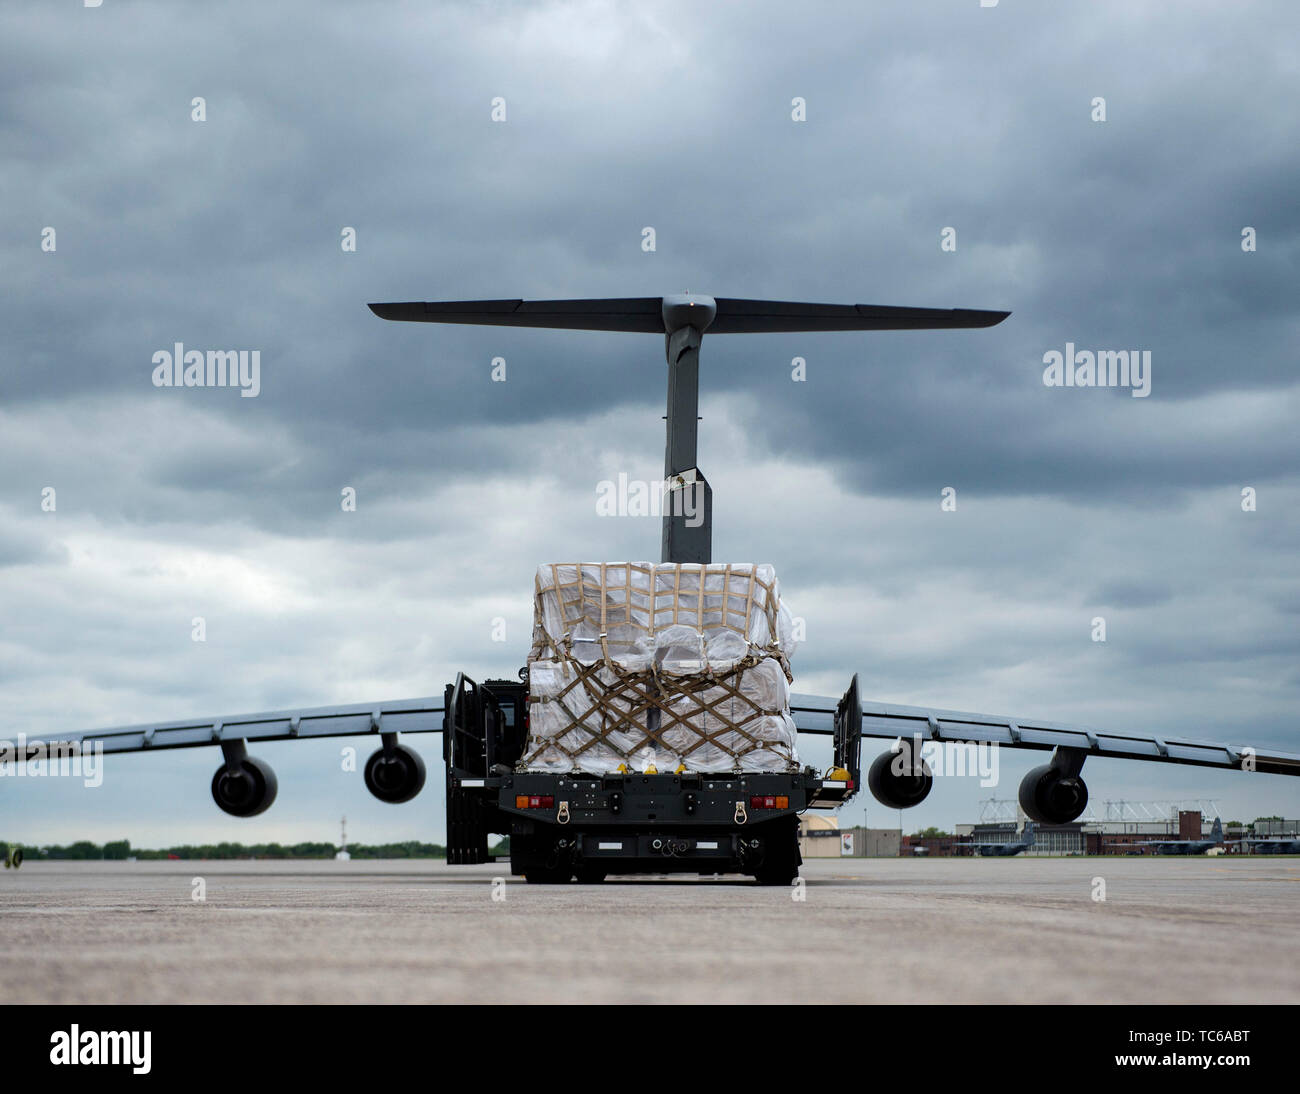 A 60K Loader from the 133rd Small Air Terminal waits to off load the cargo onto a C-5 Galaxy in St. Paul, Minn., May 22, 2019. The Airmen are taking part in the Denton Program which is a Department of Defense transportation program that moves humanitarian cargo, donated by the U.S. based Non-Governmental Organizations to developing nations to ease human suffering.  (U.S. Air National Guard photo by Amy M. Lovgren) Stock Photo